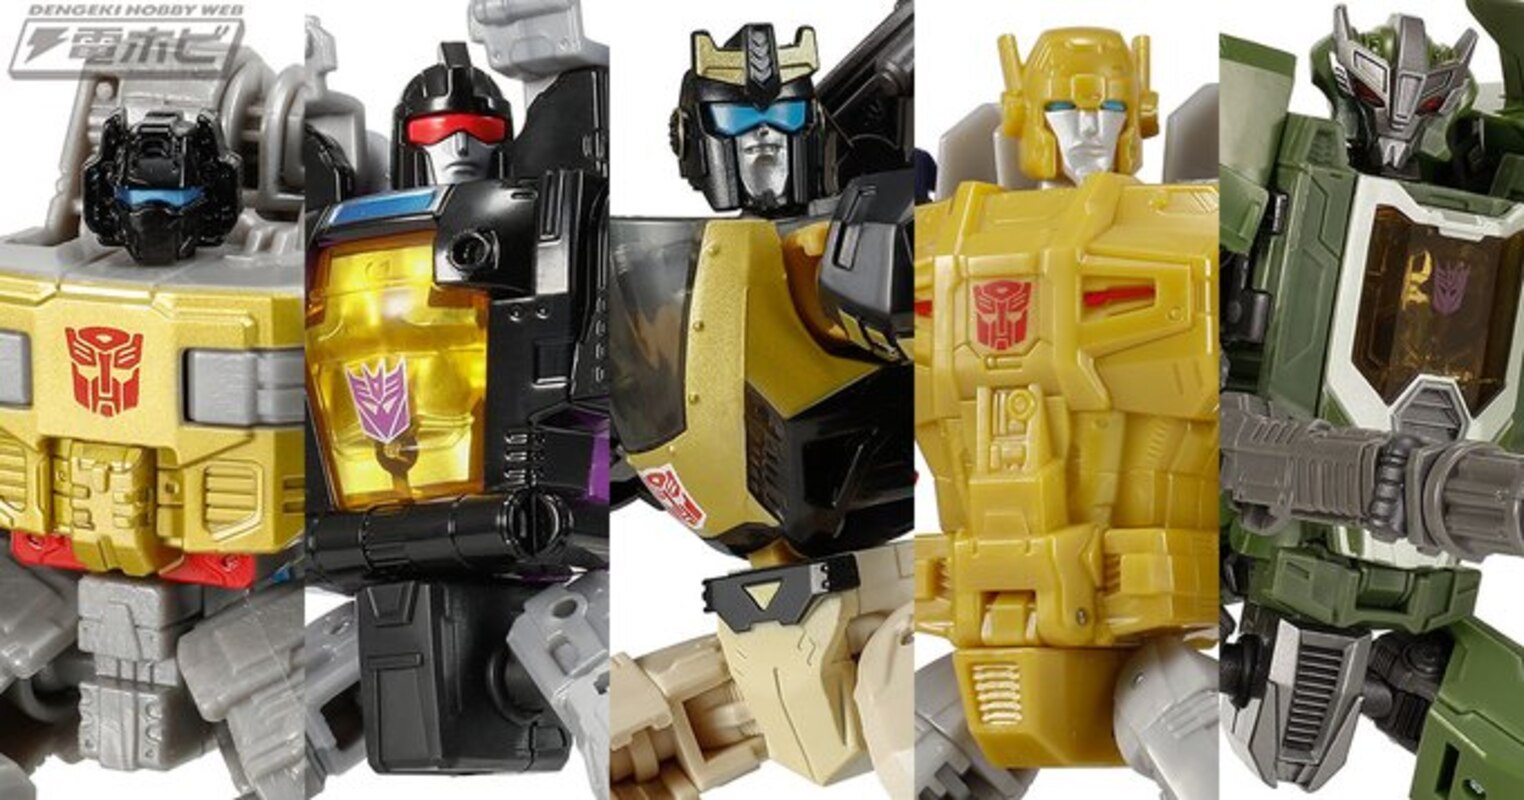 Takara TOMY Transformers Legacy Evolution New Official Images - Skyquake, Prowl, Metalhawk, More